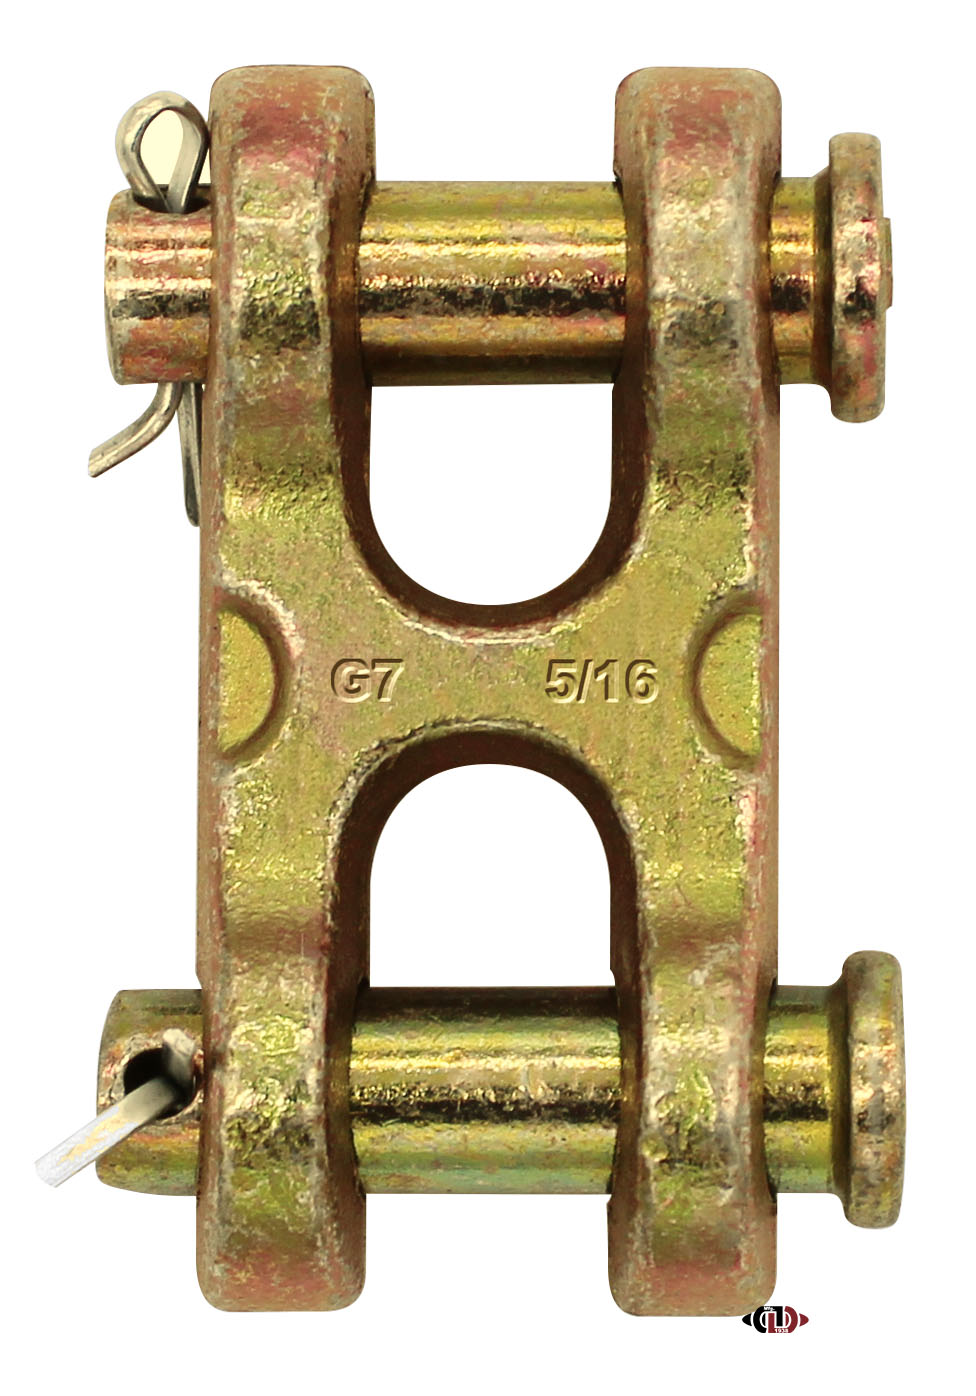 Double Clevis Link,1/2 in,11,300 lb,GR70 